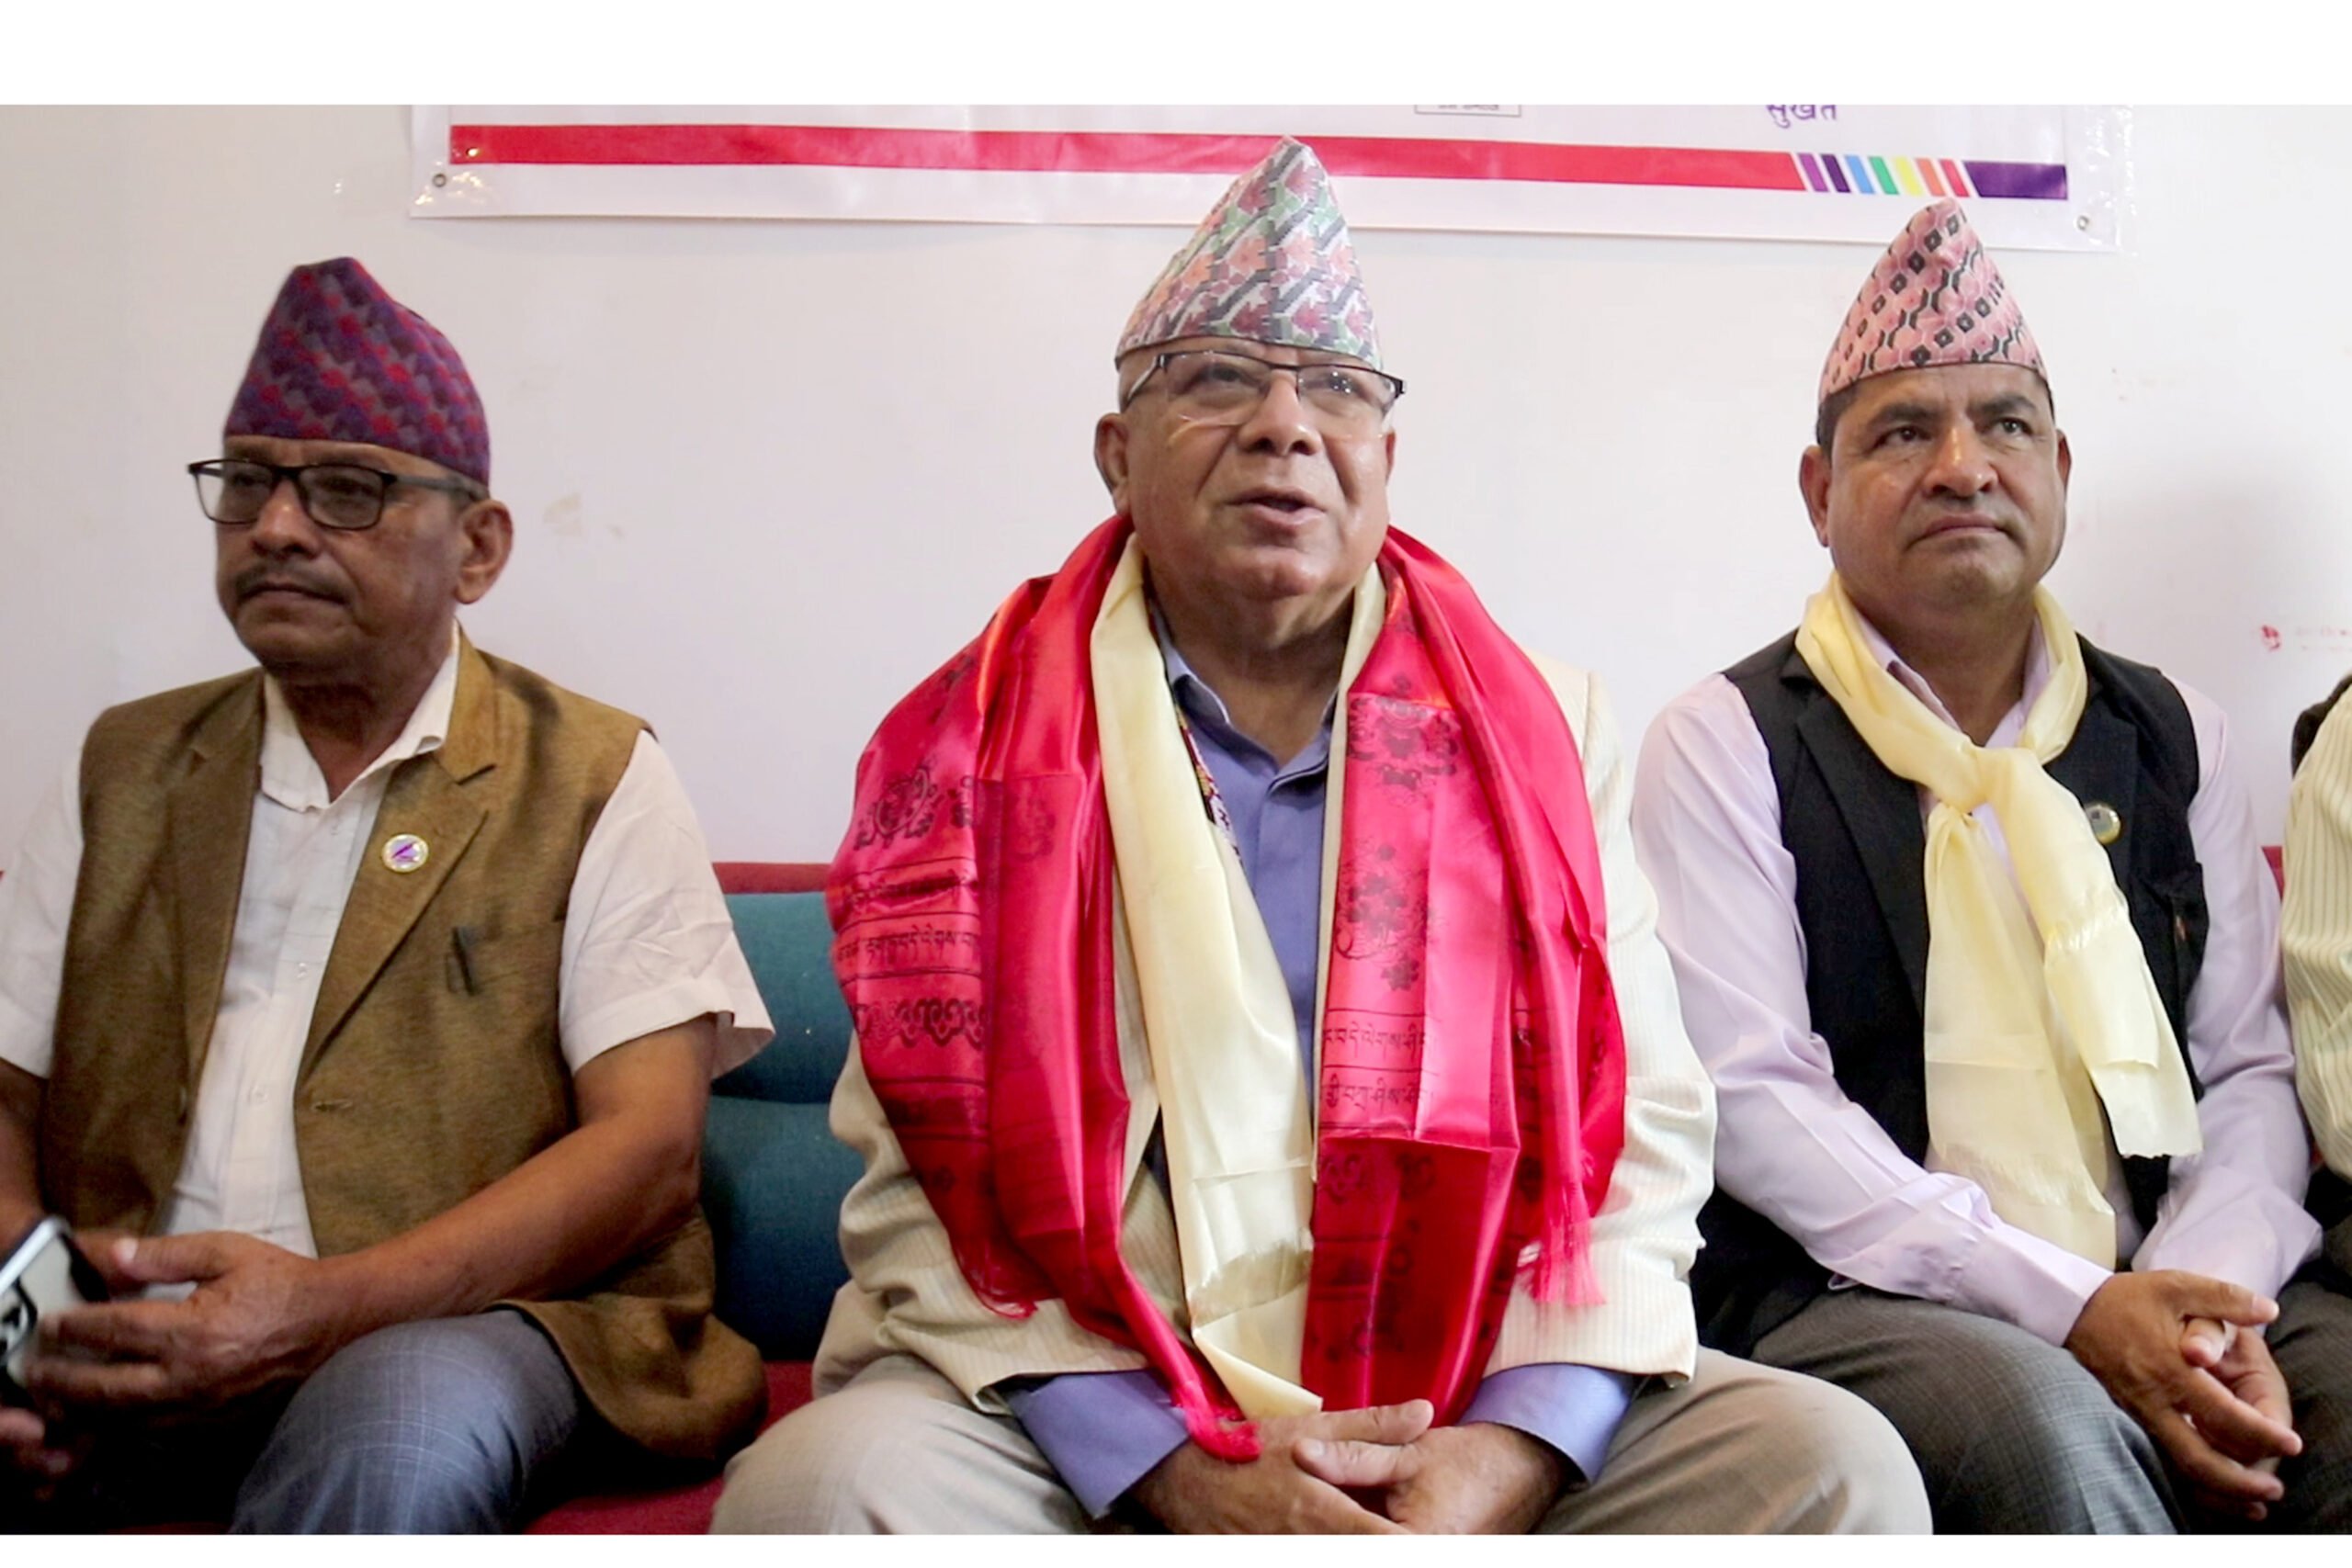 Unified Socialist Chair Nepal rules out possibility of communist unification